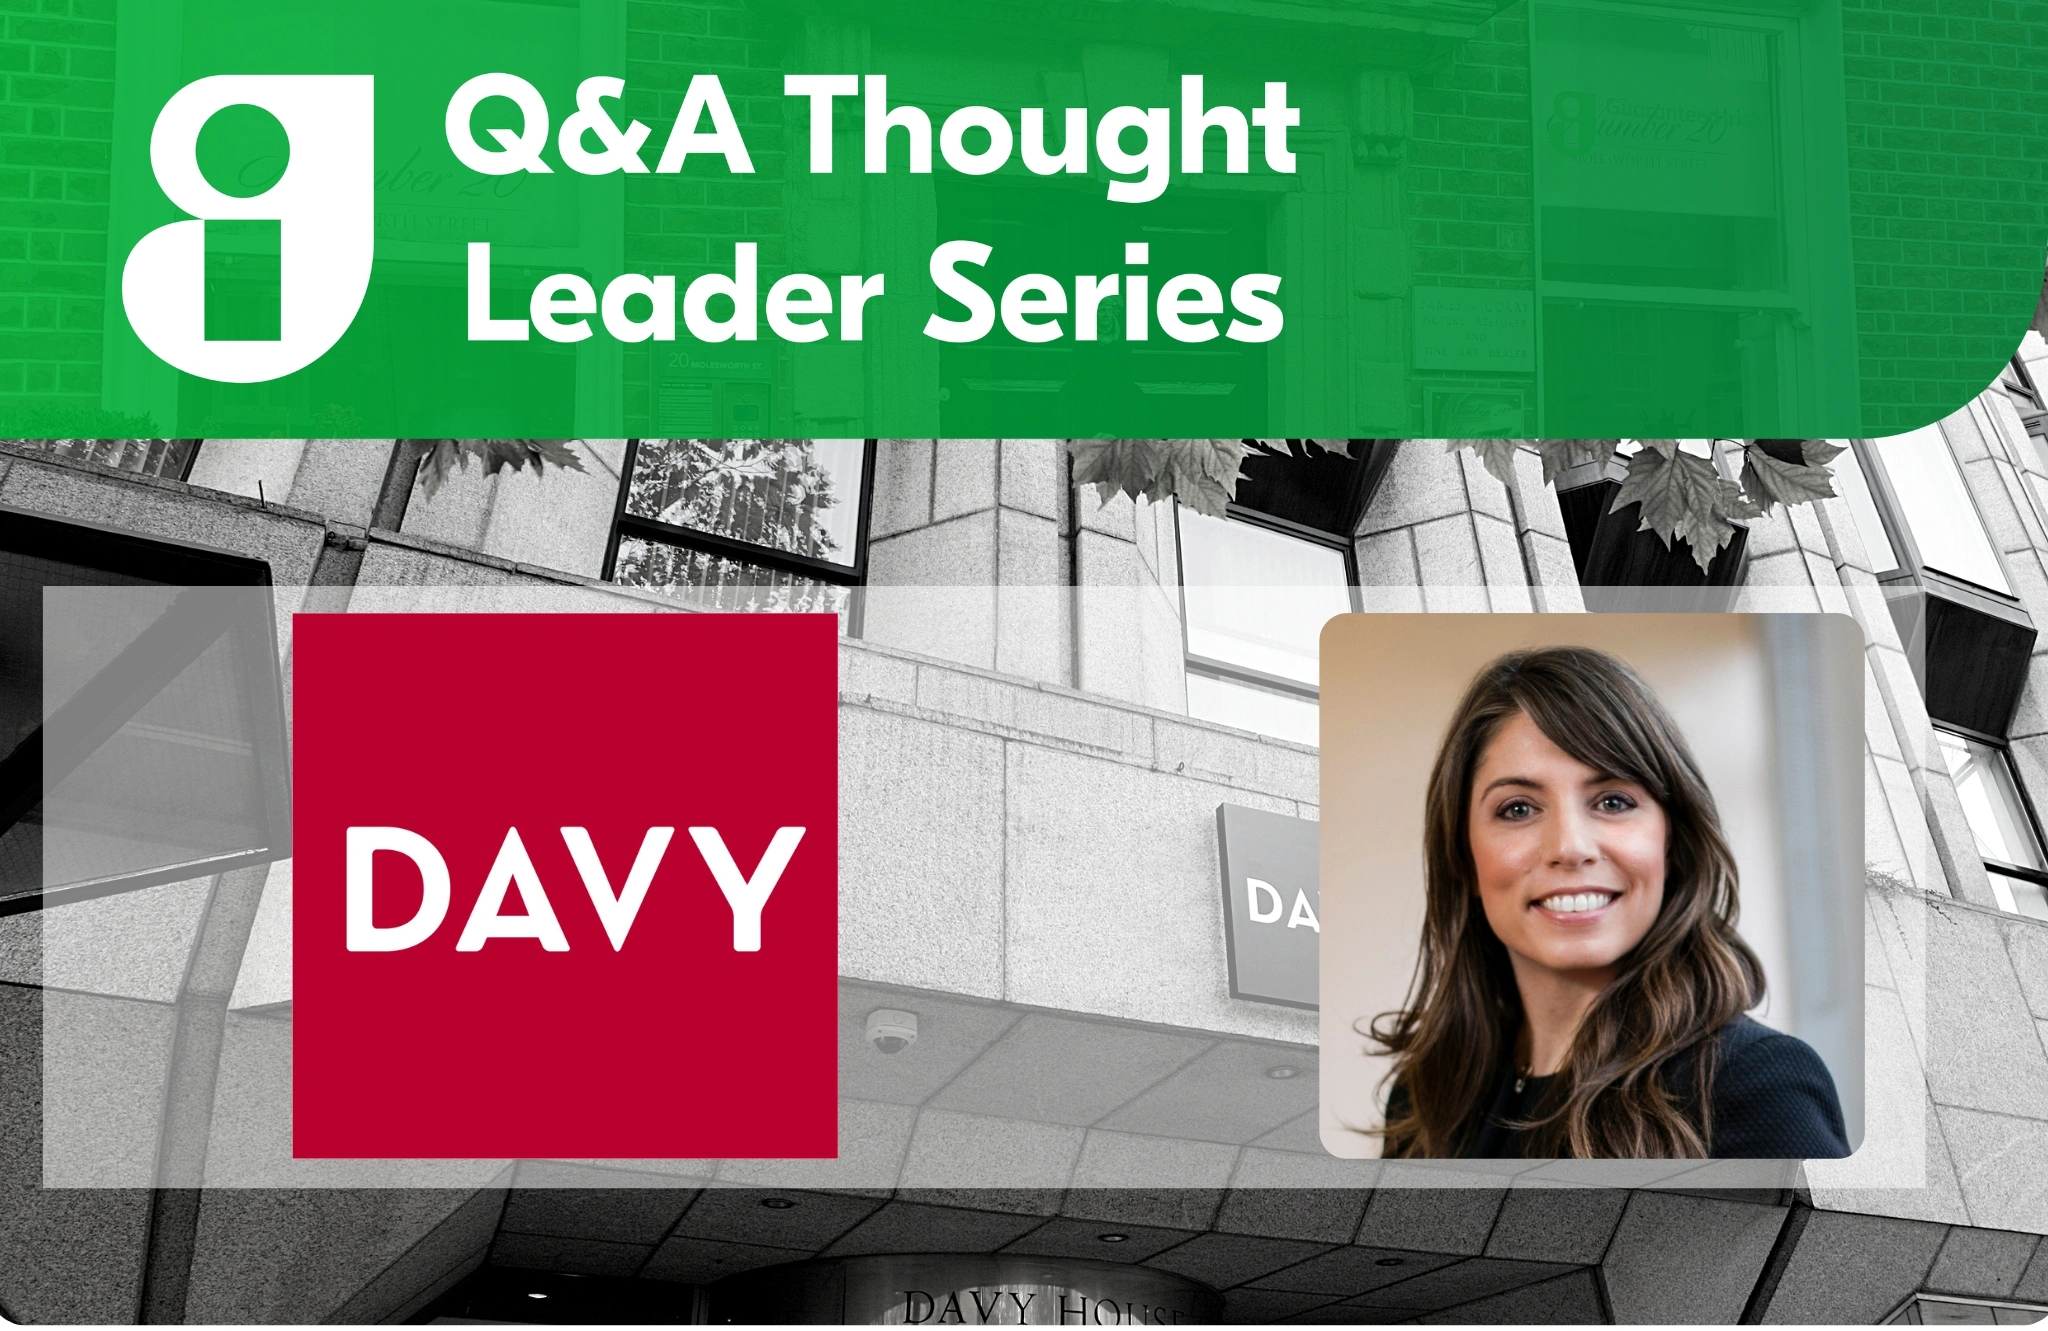 Guaranteed Irish Thought Leaders Q&A Series: Marah Curtin Director of Client Engagement Davy